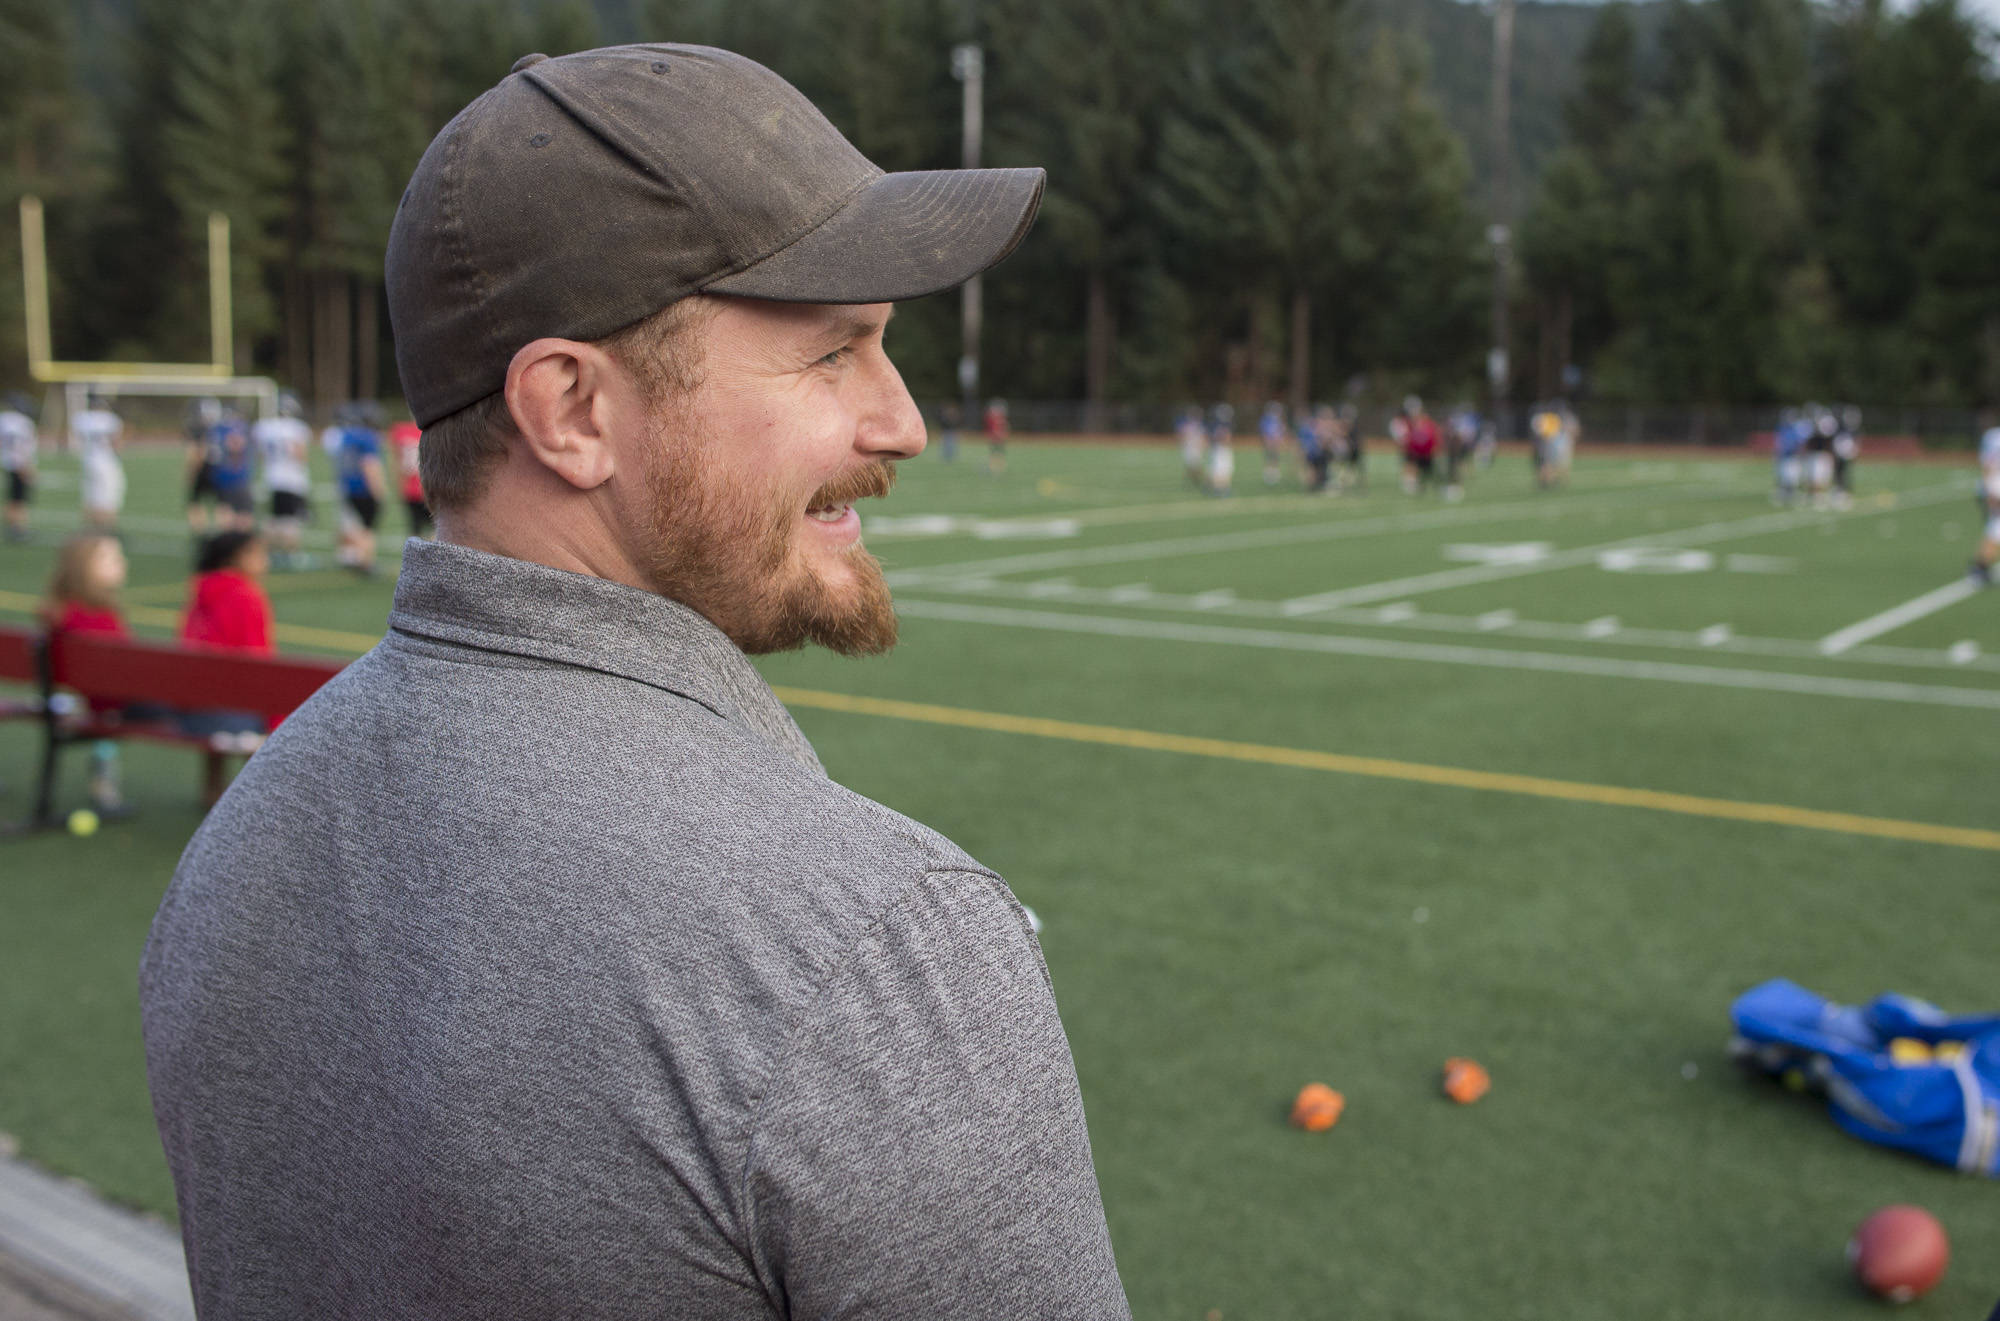 Certified athletic trainer Jake Ritter watches over Juneau United’s football practice at Adair-Kennedy Memorial Field on Wednesday. (Michael Penn | Juneau Empire)